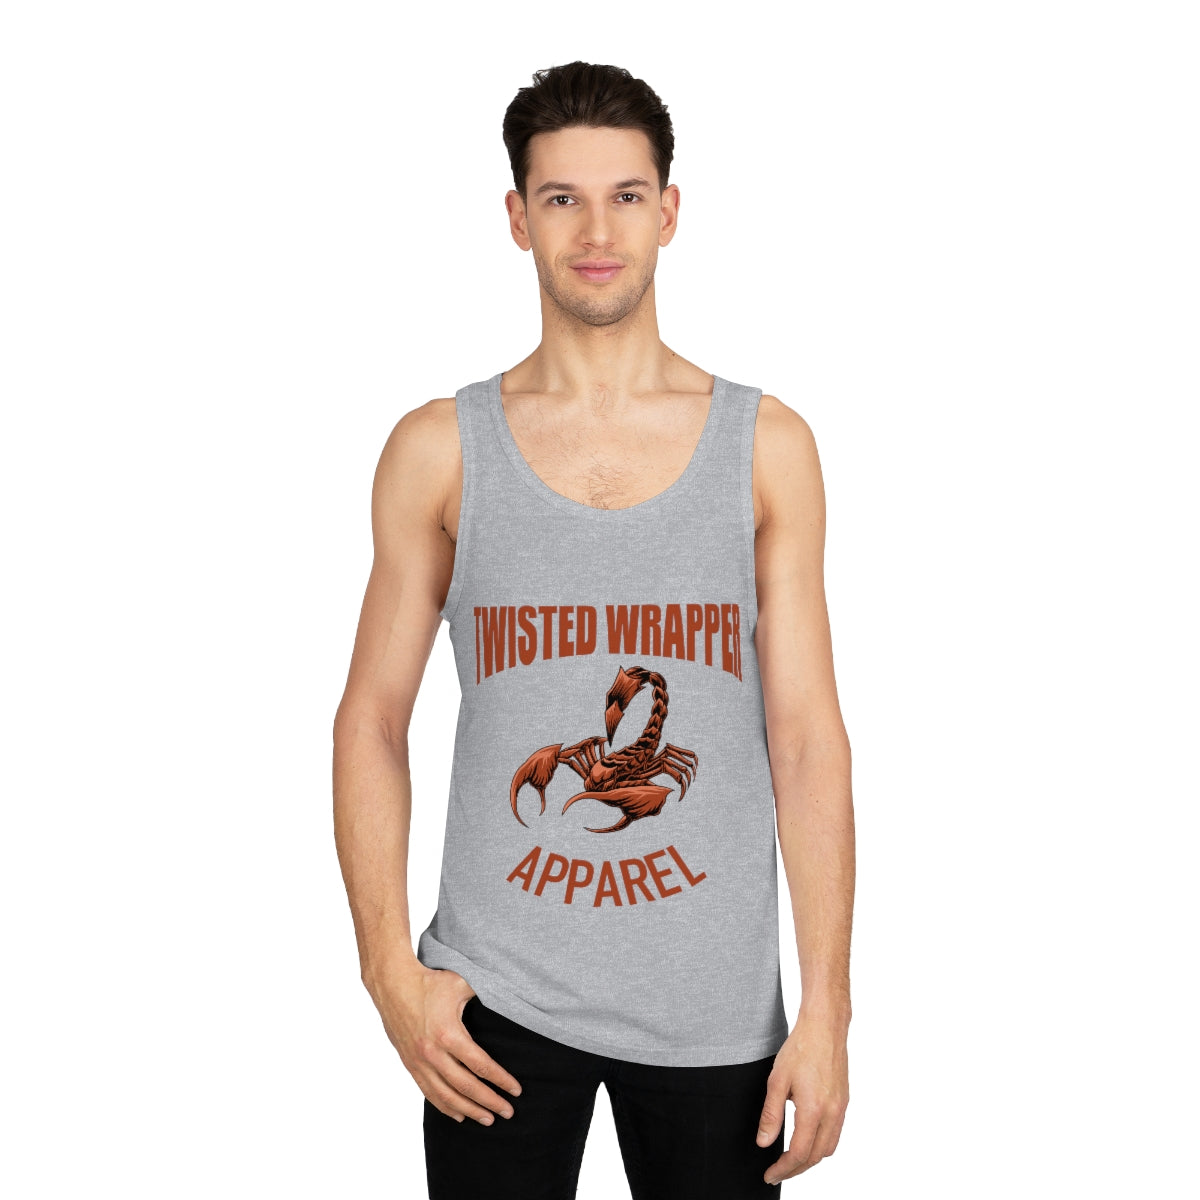 Unisex Softstyle™ Tank Top - TwistedWrapper